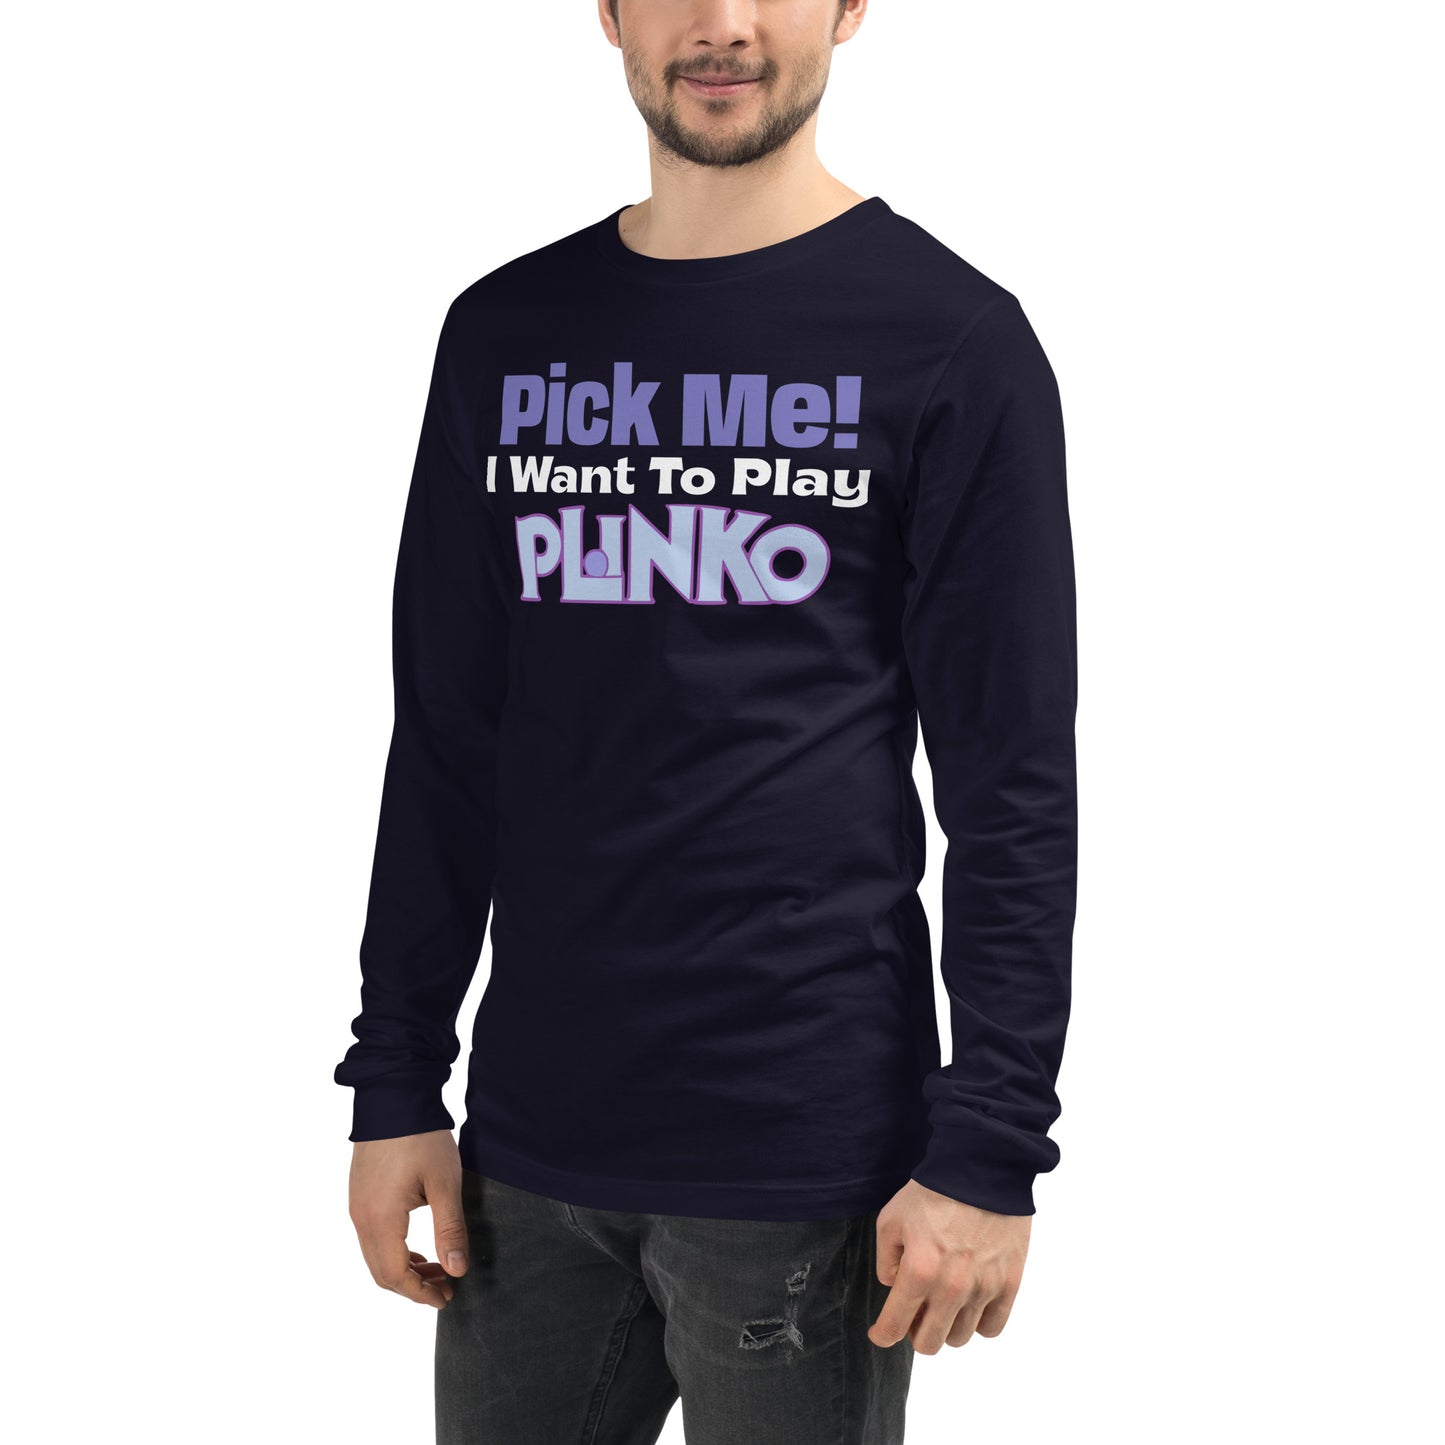 Unisex Long Sleeve Tee - Pick Me I Want to Play Plinko on Lets Make a Deal